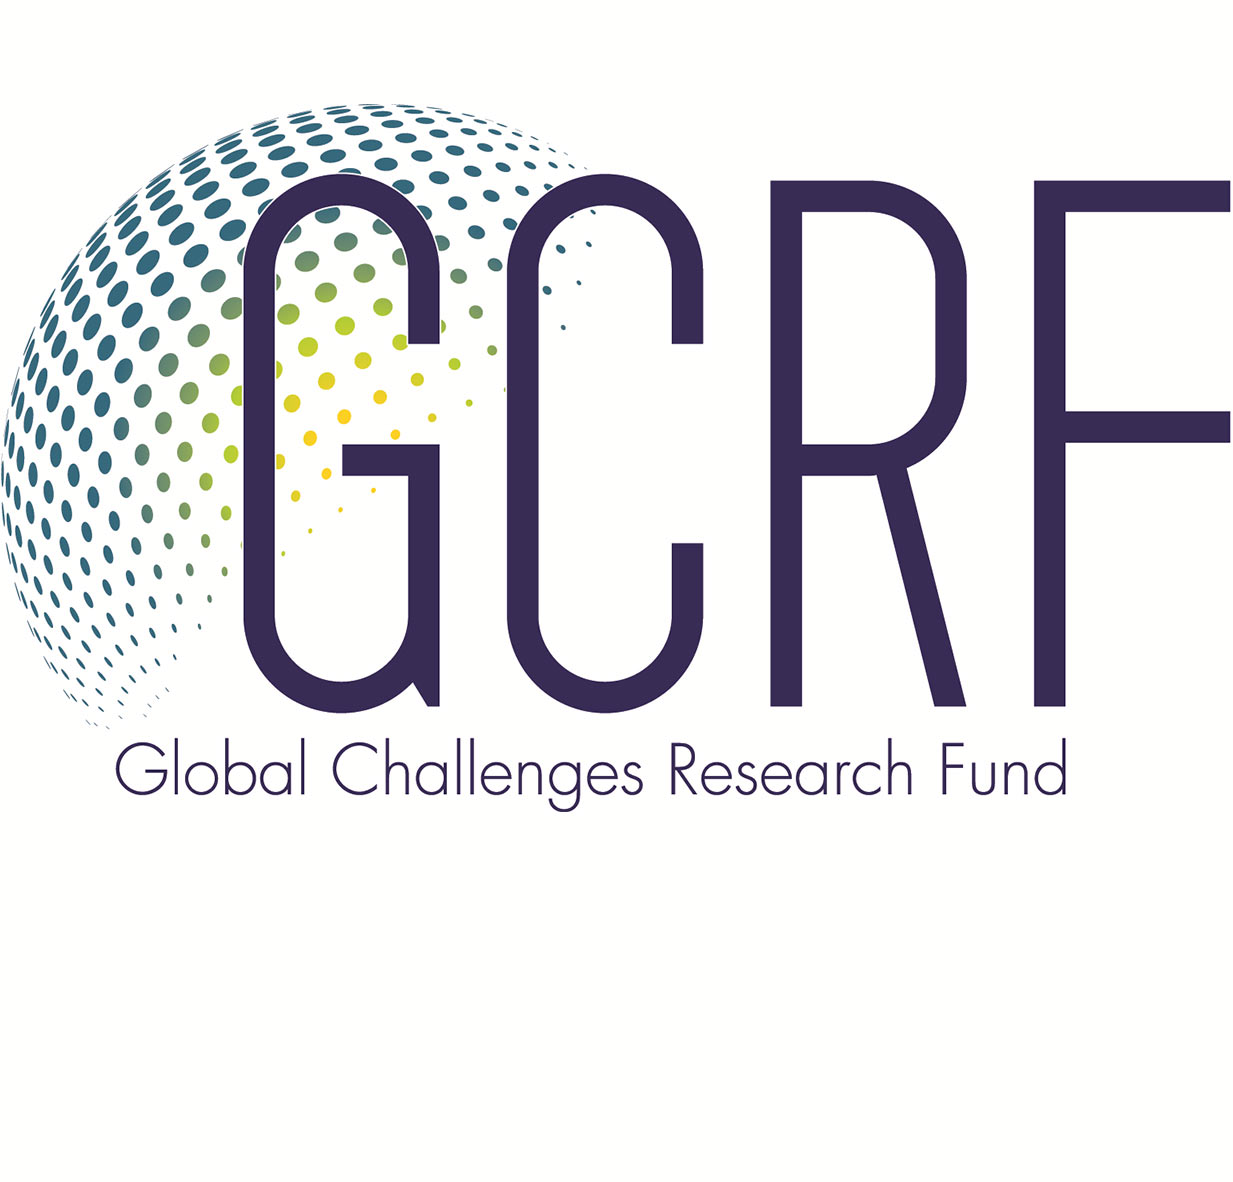 GCRF Global Challenges Research Fund logo